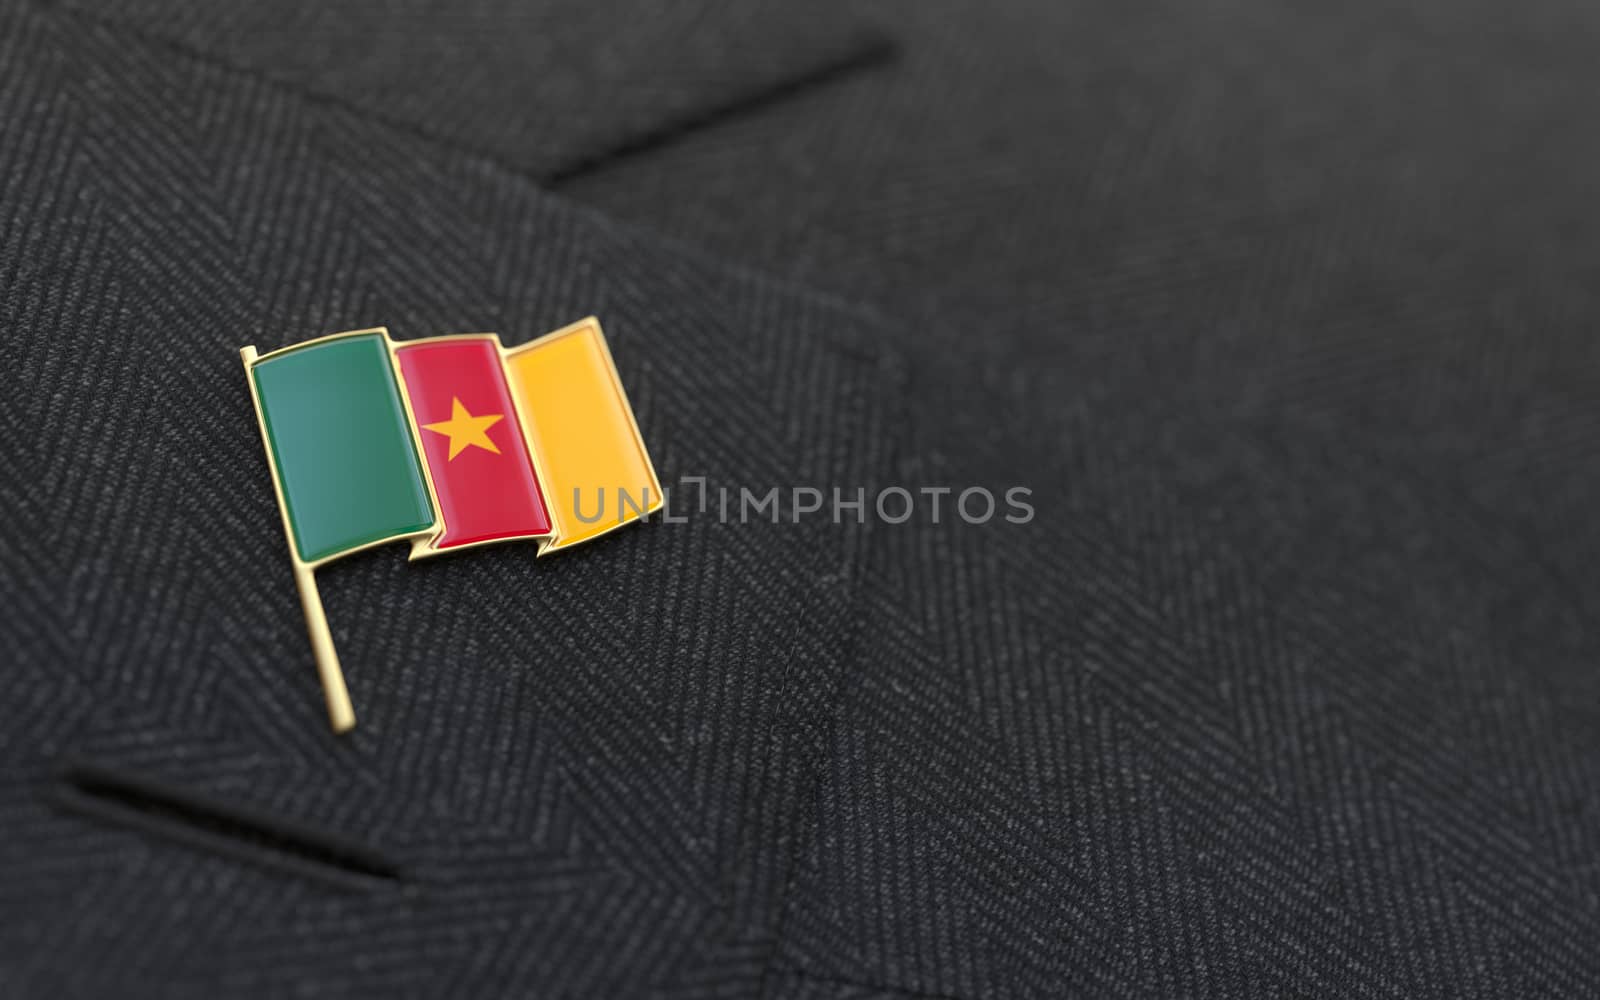 Cameroon flag lapel pin on the collar of a business suit jacket shows patriotism